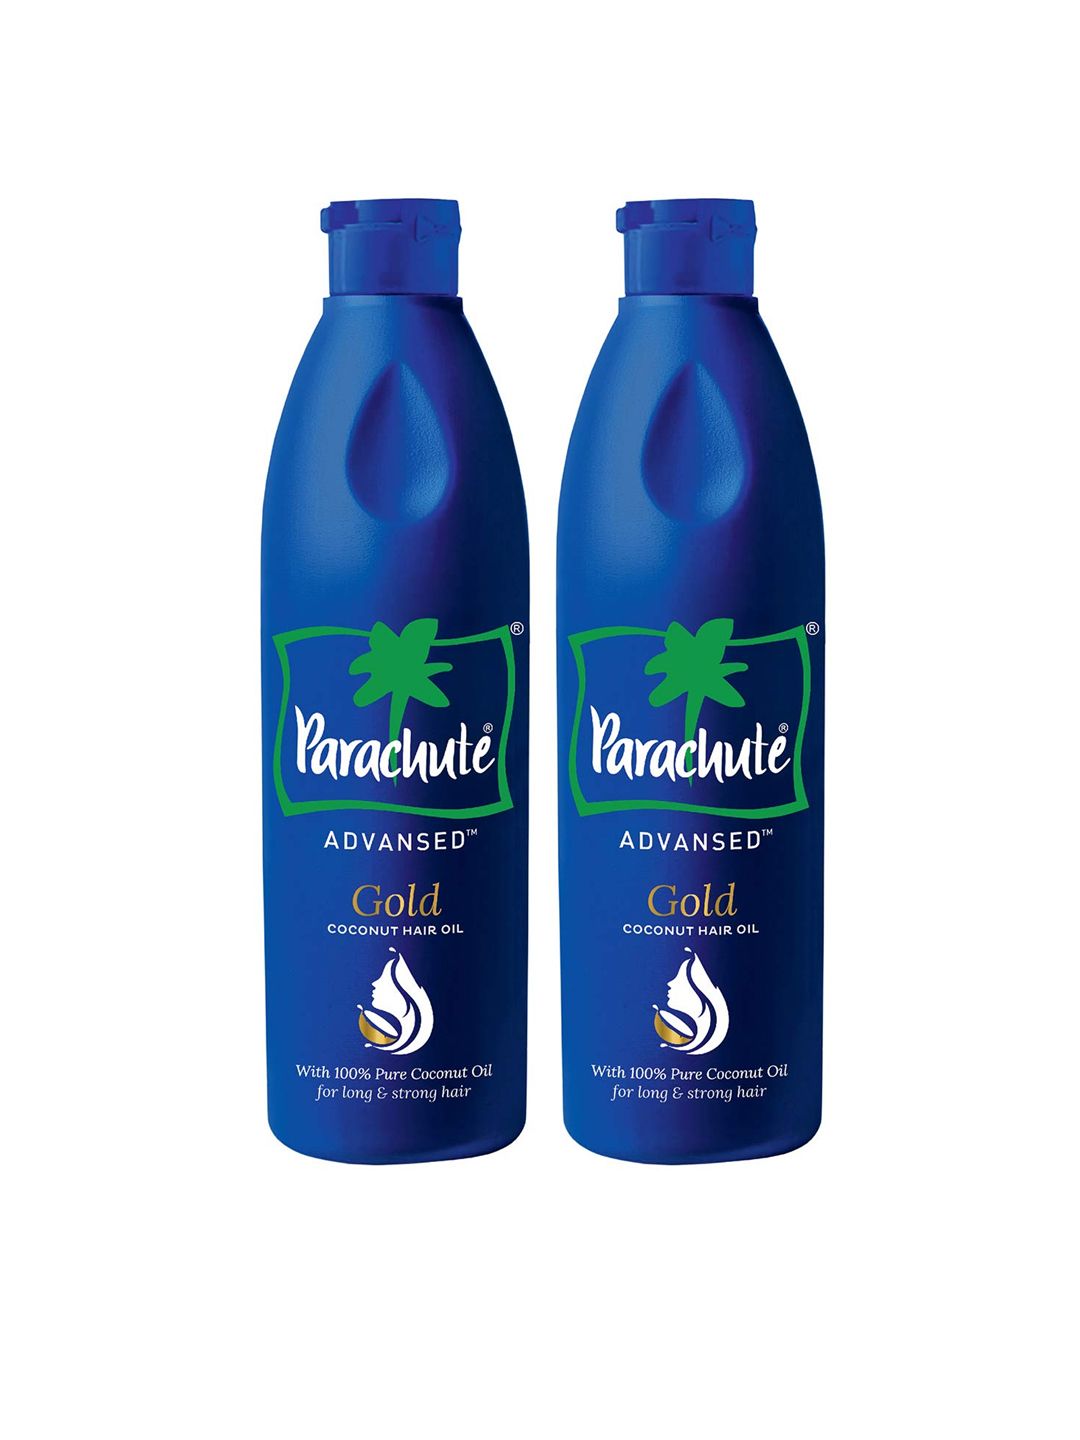 Parachute Advansed Set of 2 Gold Coconut Hair Oil -800 ml Price in India